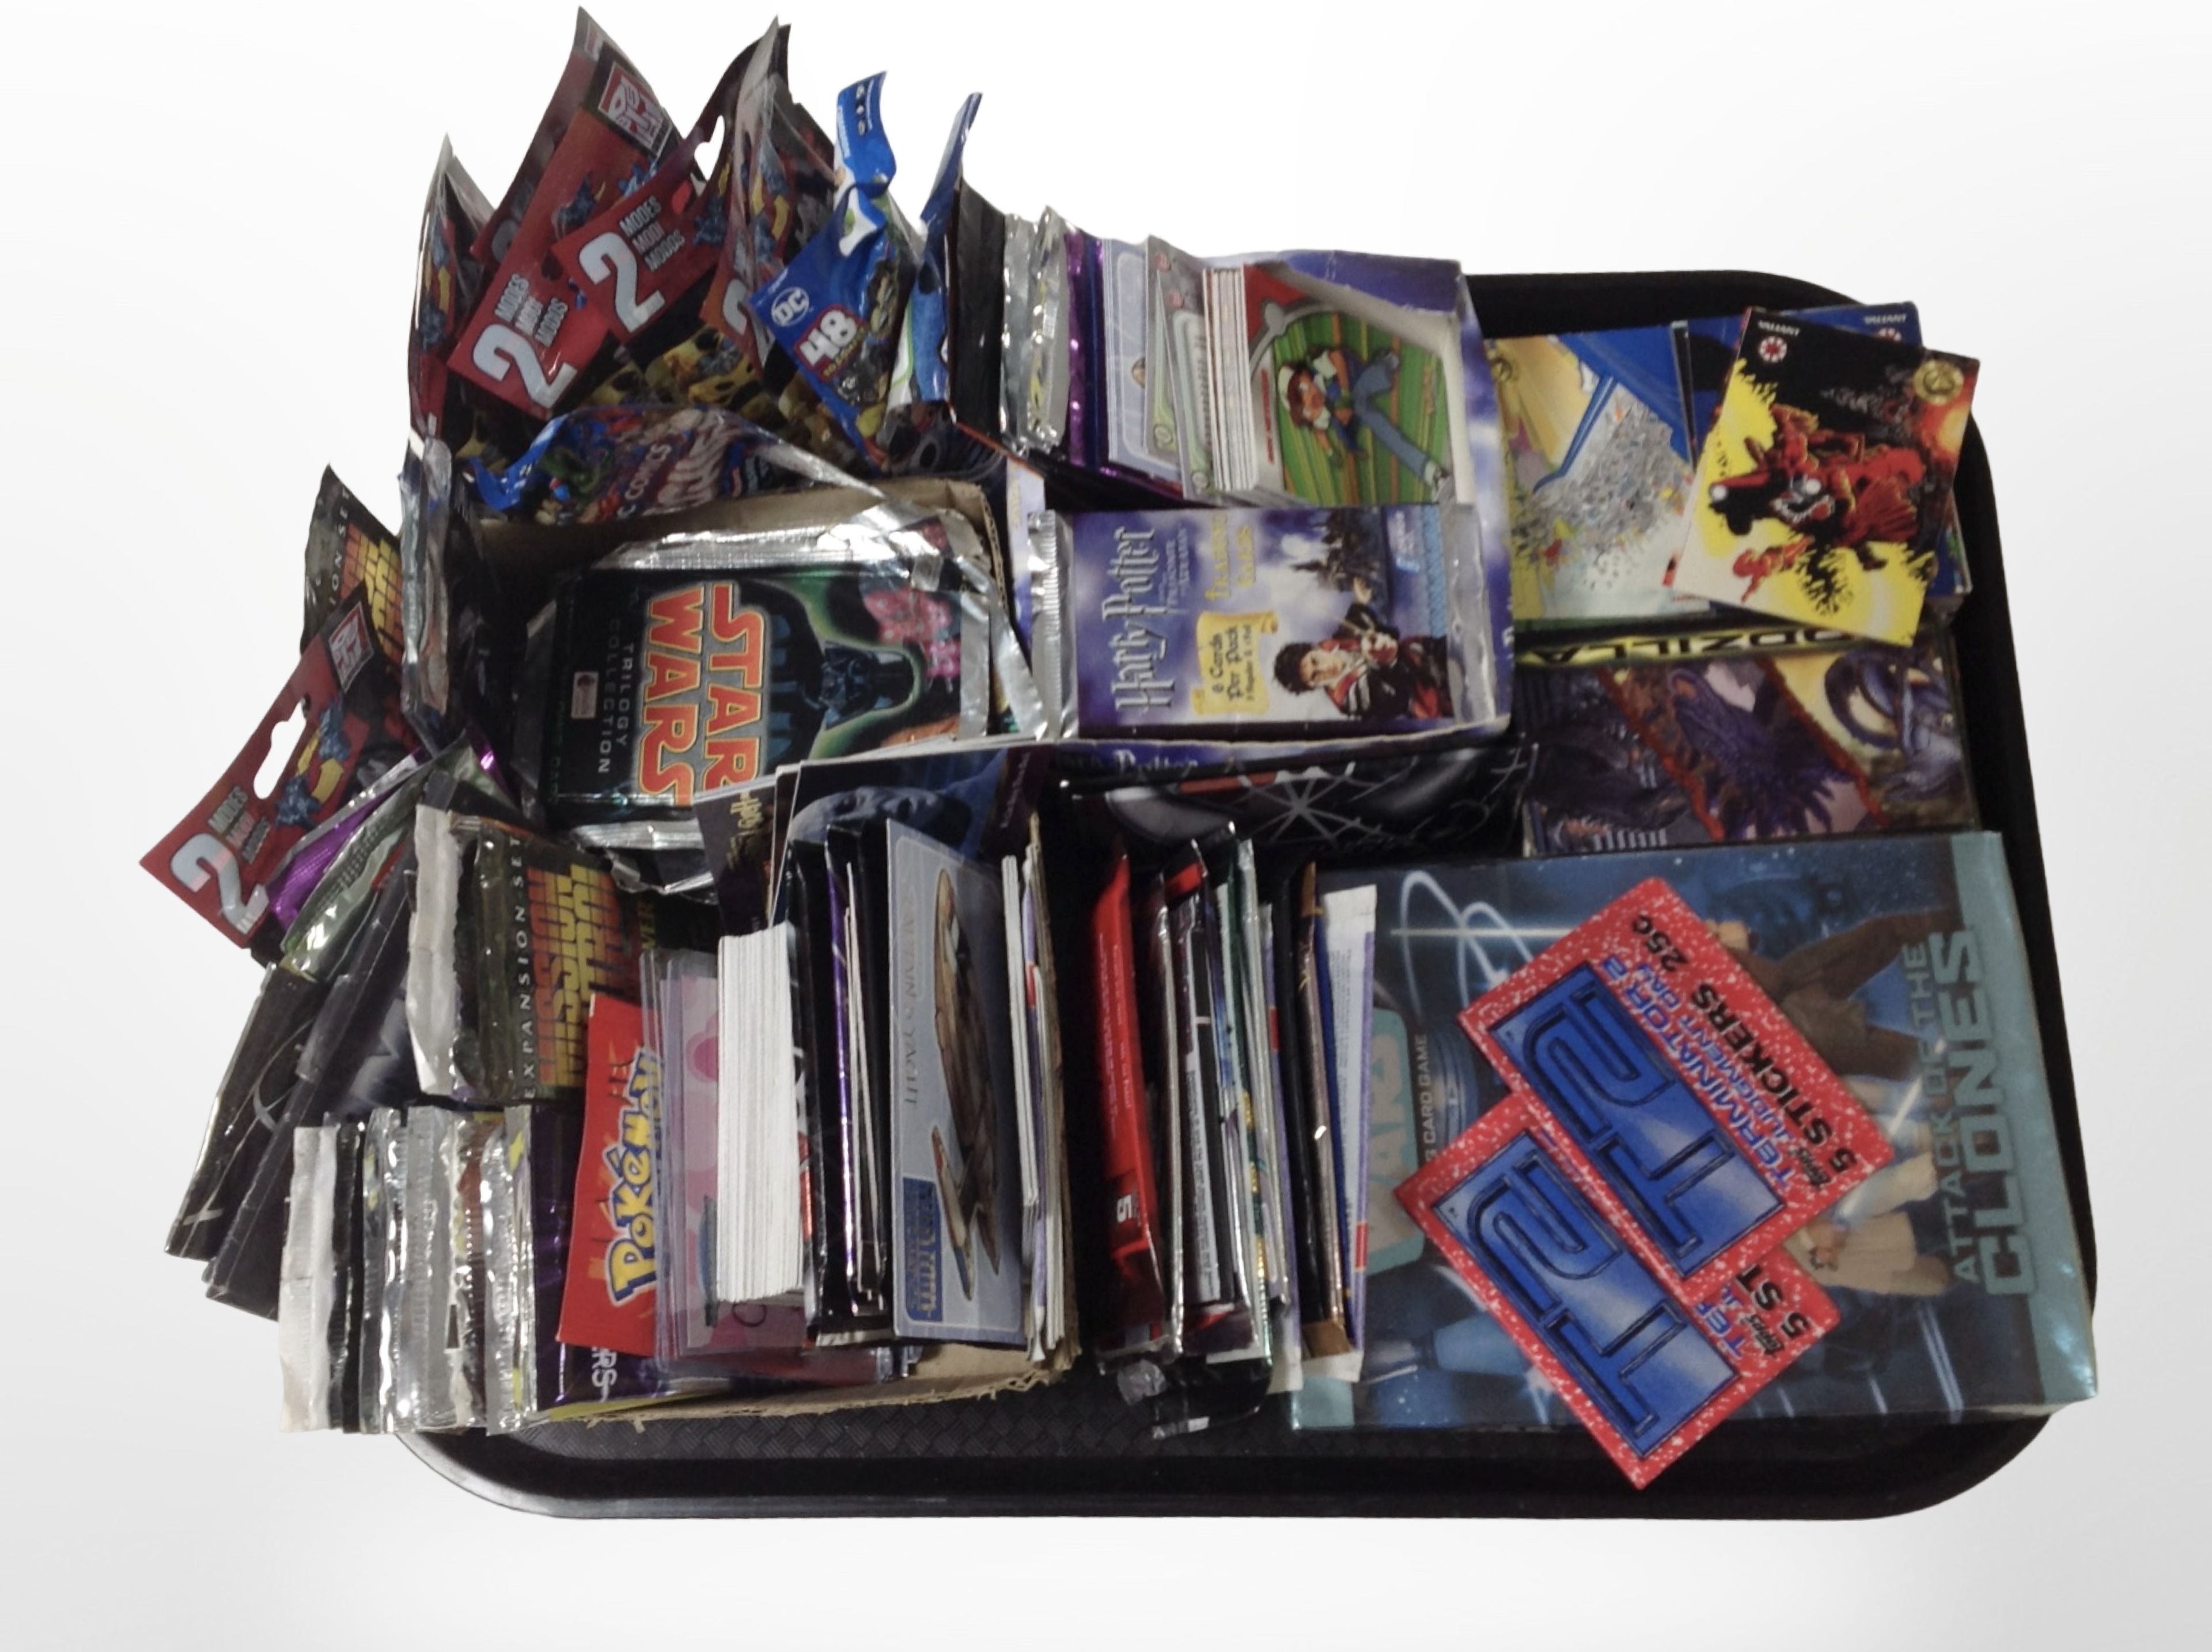 A group of trading cards to include Star Wars, Harry Potter, Pokémon, etc.